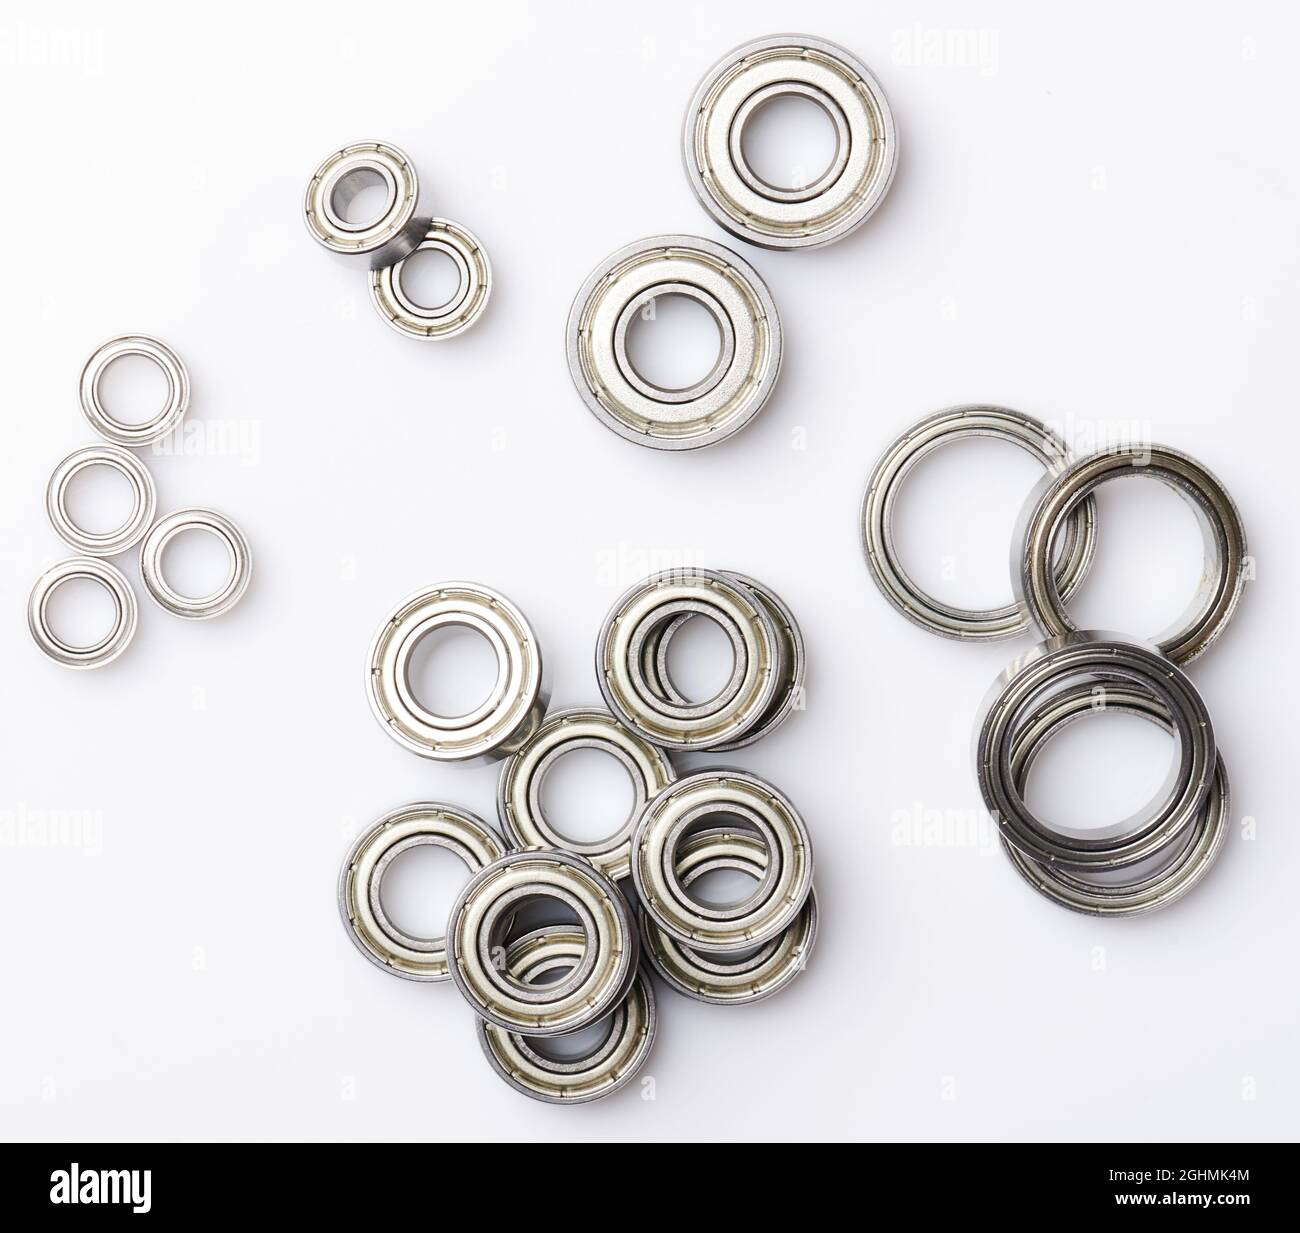 Groups of different size bearings isolated on studio background Stock Photo